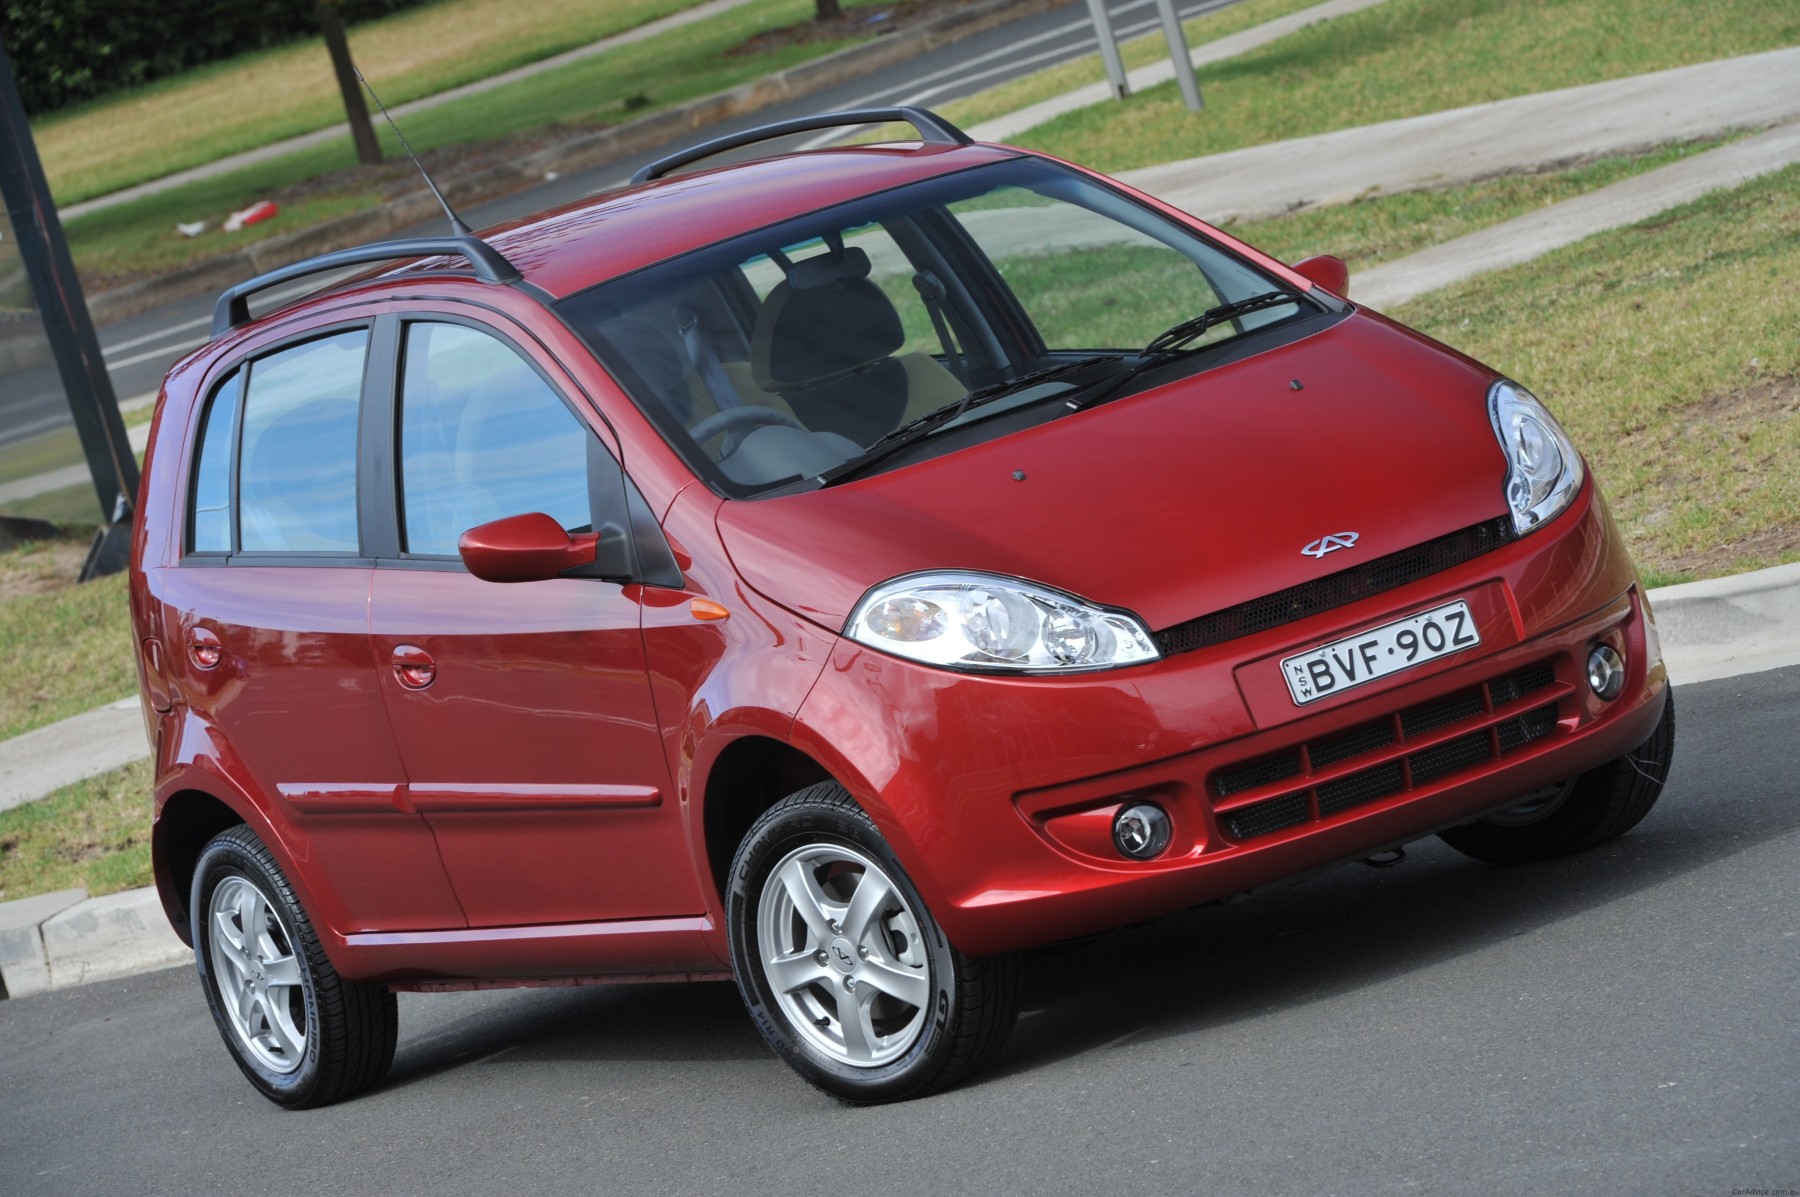  Chery  picture 13 reviews news specs buy car 